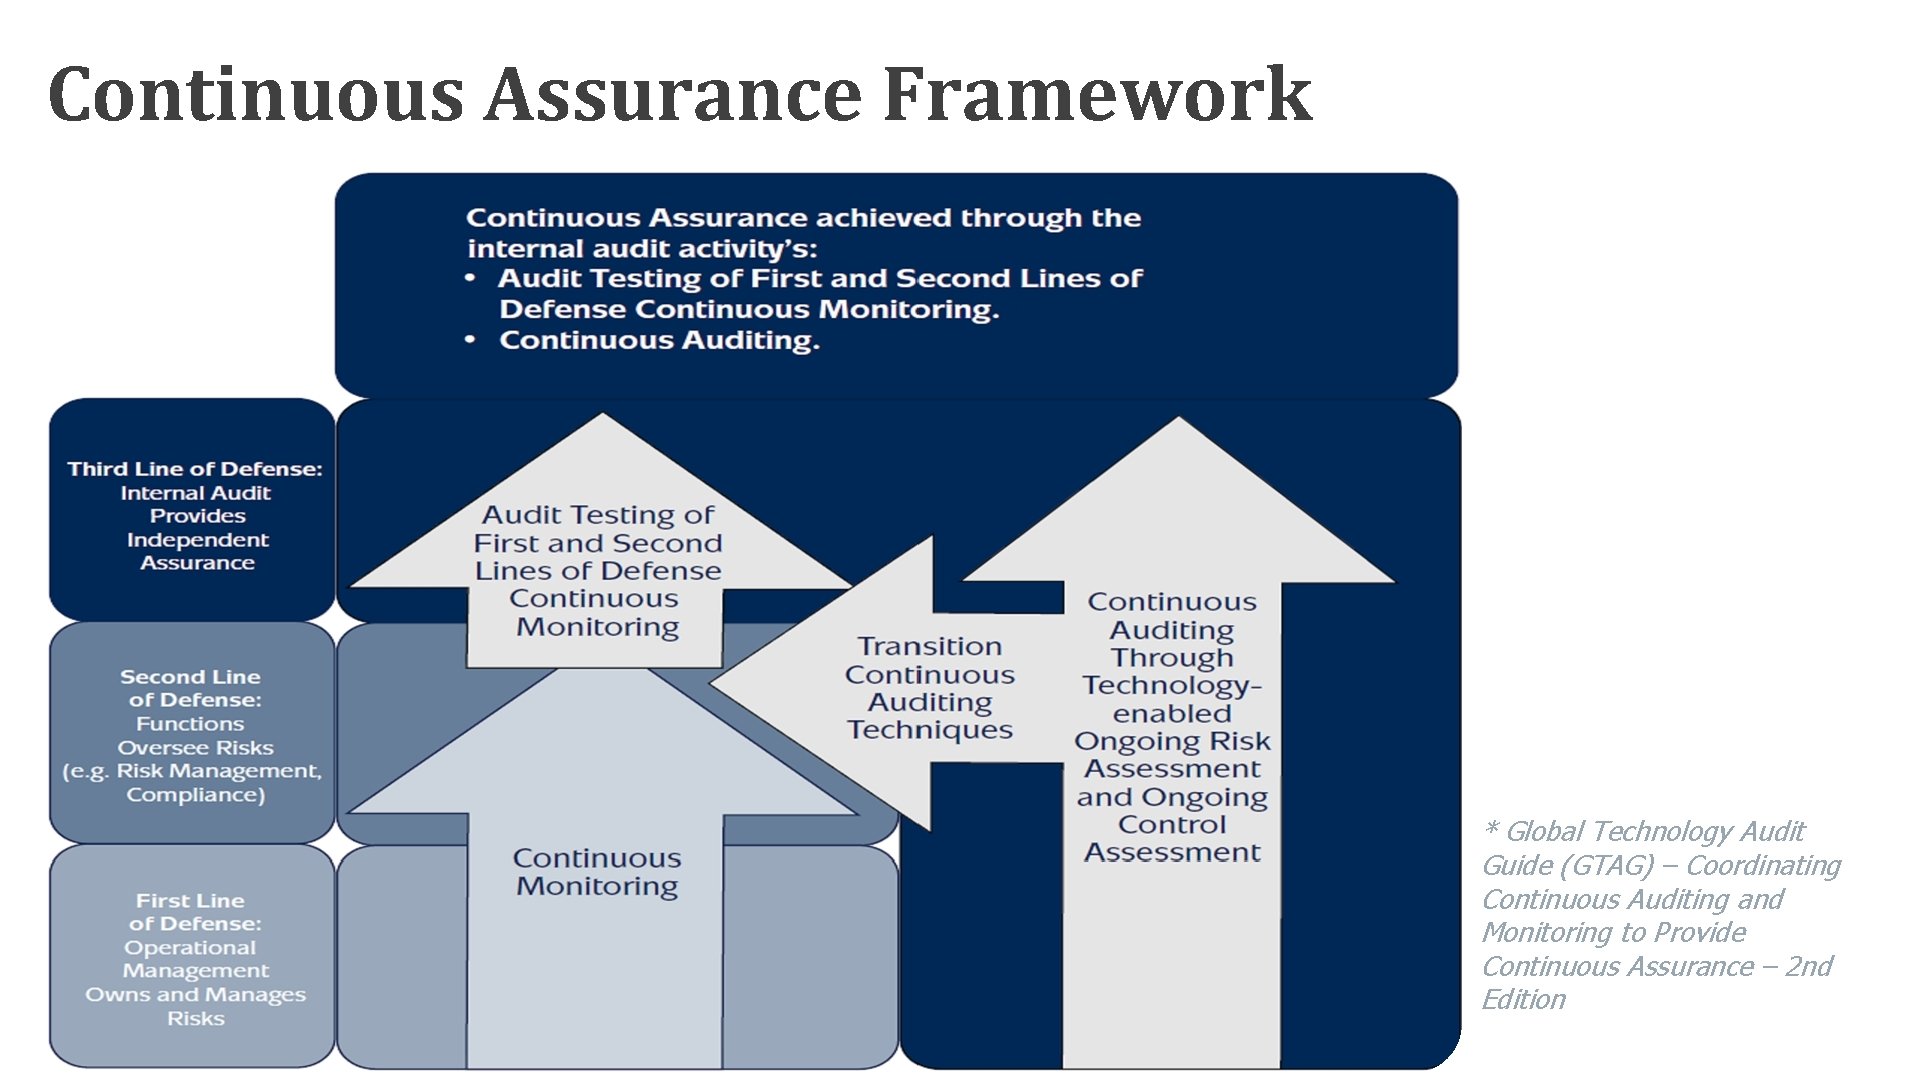 Continuous Assurance Framework TITLE HERE * Global Technology Audit Guide (GTAG) – Coordinating Continuous